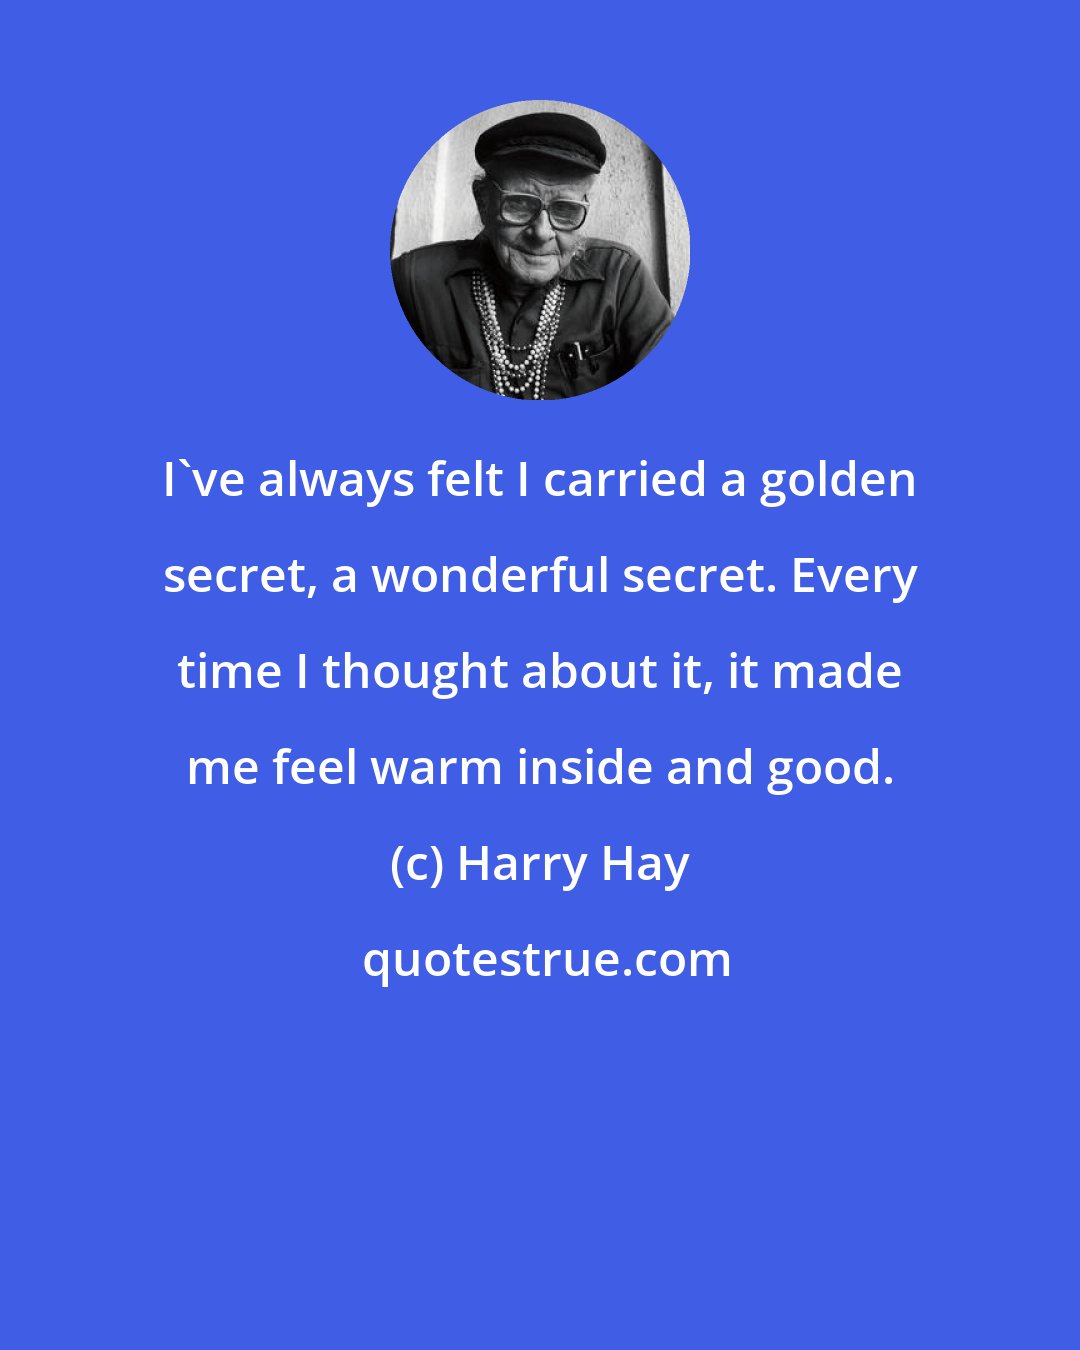 Harry Hay: I've always felt I carried a golden secret, a wonderful secret. Every time I thought about it, it made me feel warm inside and good.